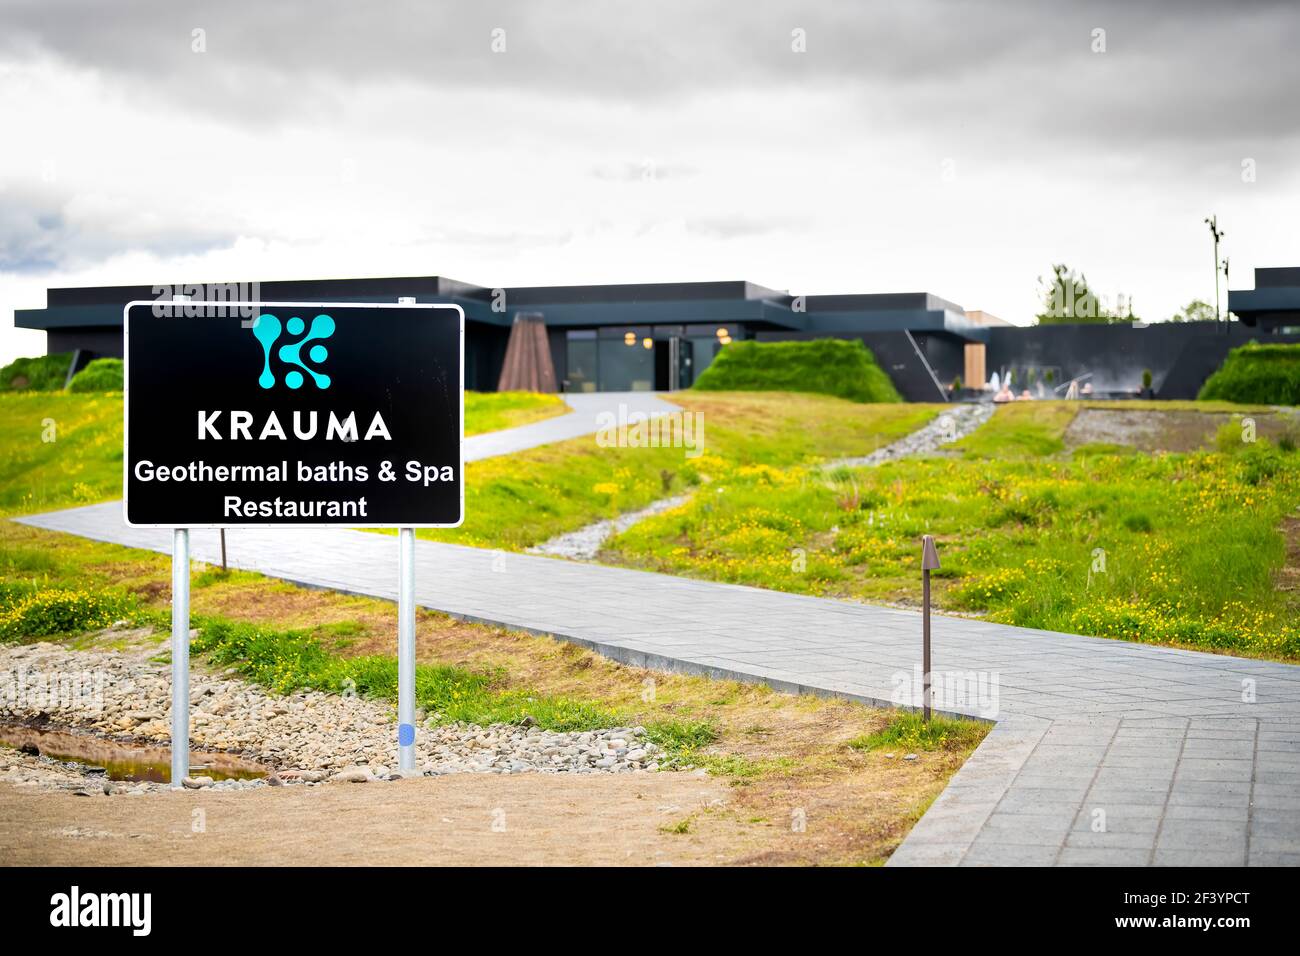 Deildartunguhver, Iceland - June 18, 2018: Krauma hot springs resort spa travel building sign text in English and people swimming in hot water outside Stock Photo